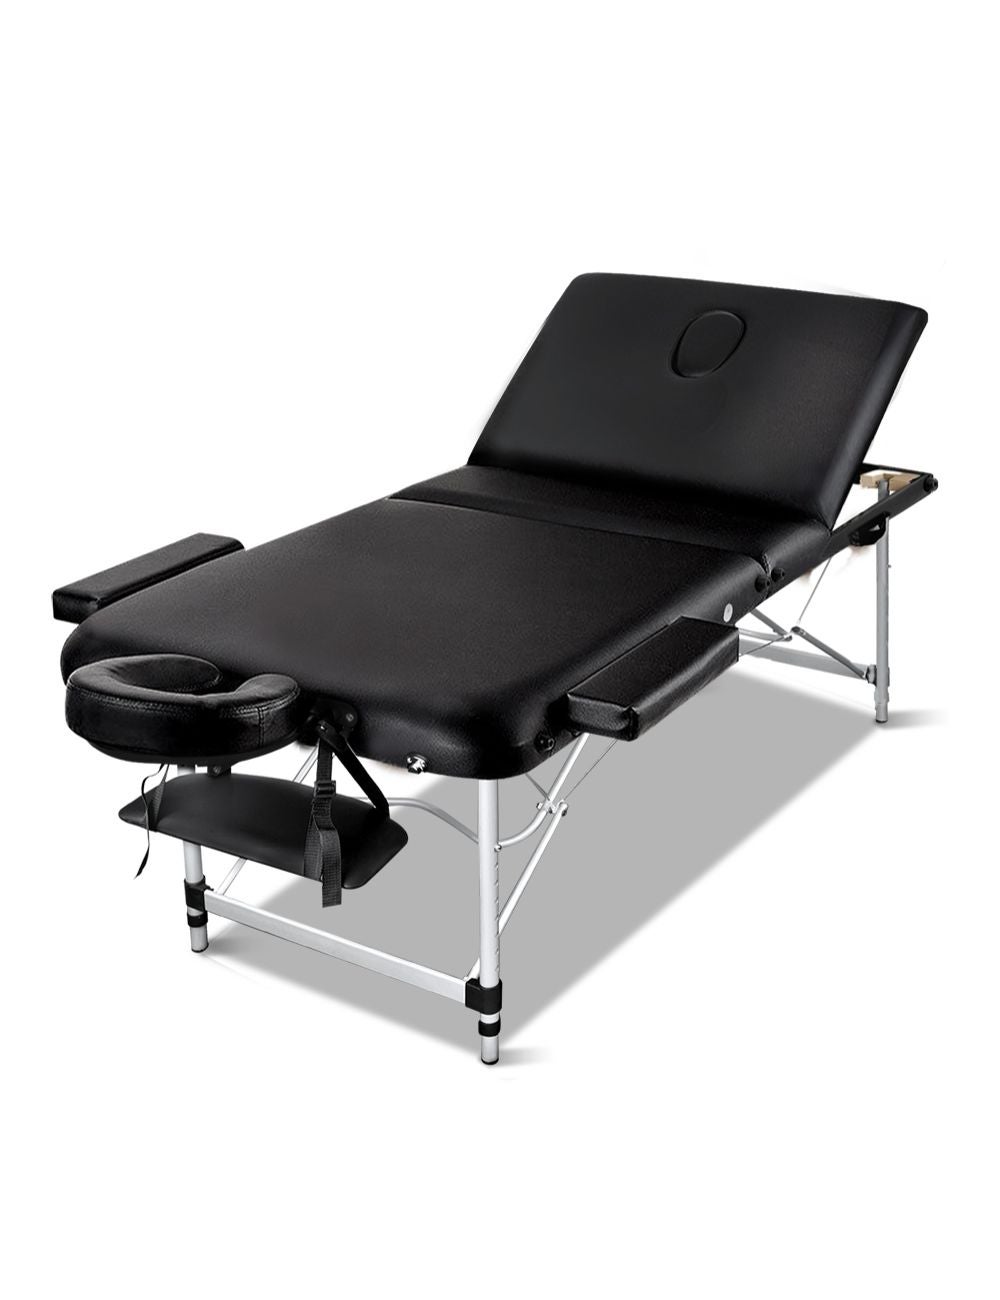 Zenses 70cm Portable 3 Fold Aluminium Massage Table Therapy Beauty Waxing Bed Black Autograph